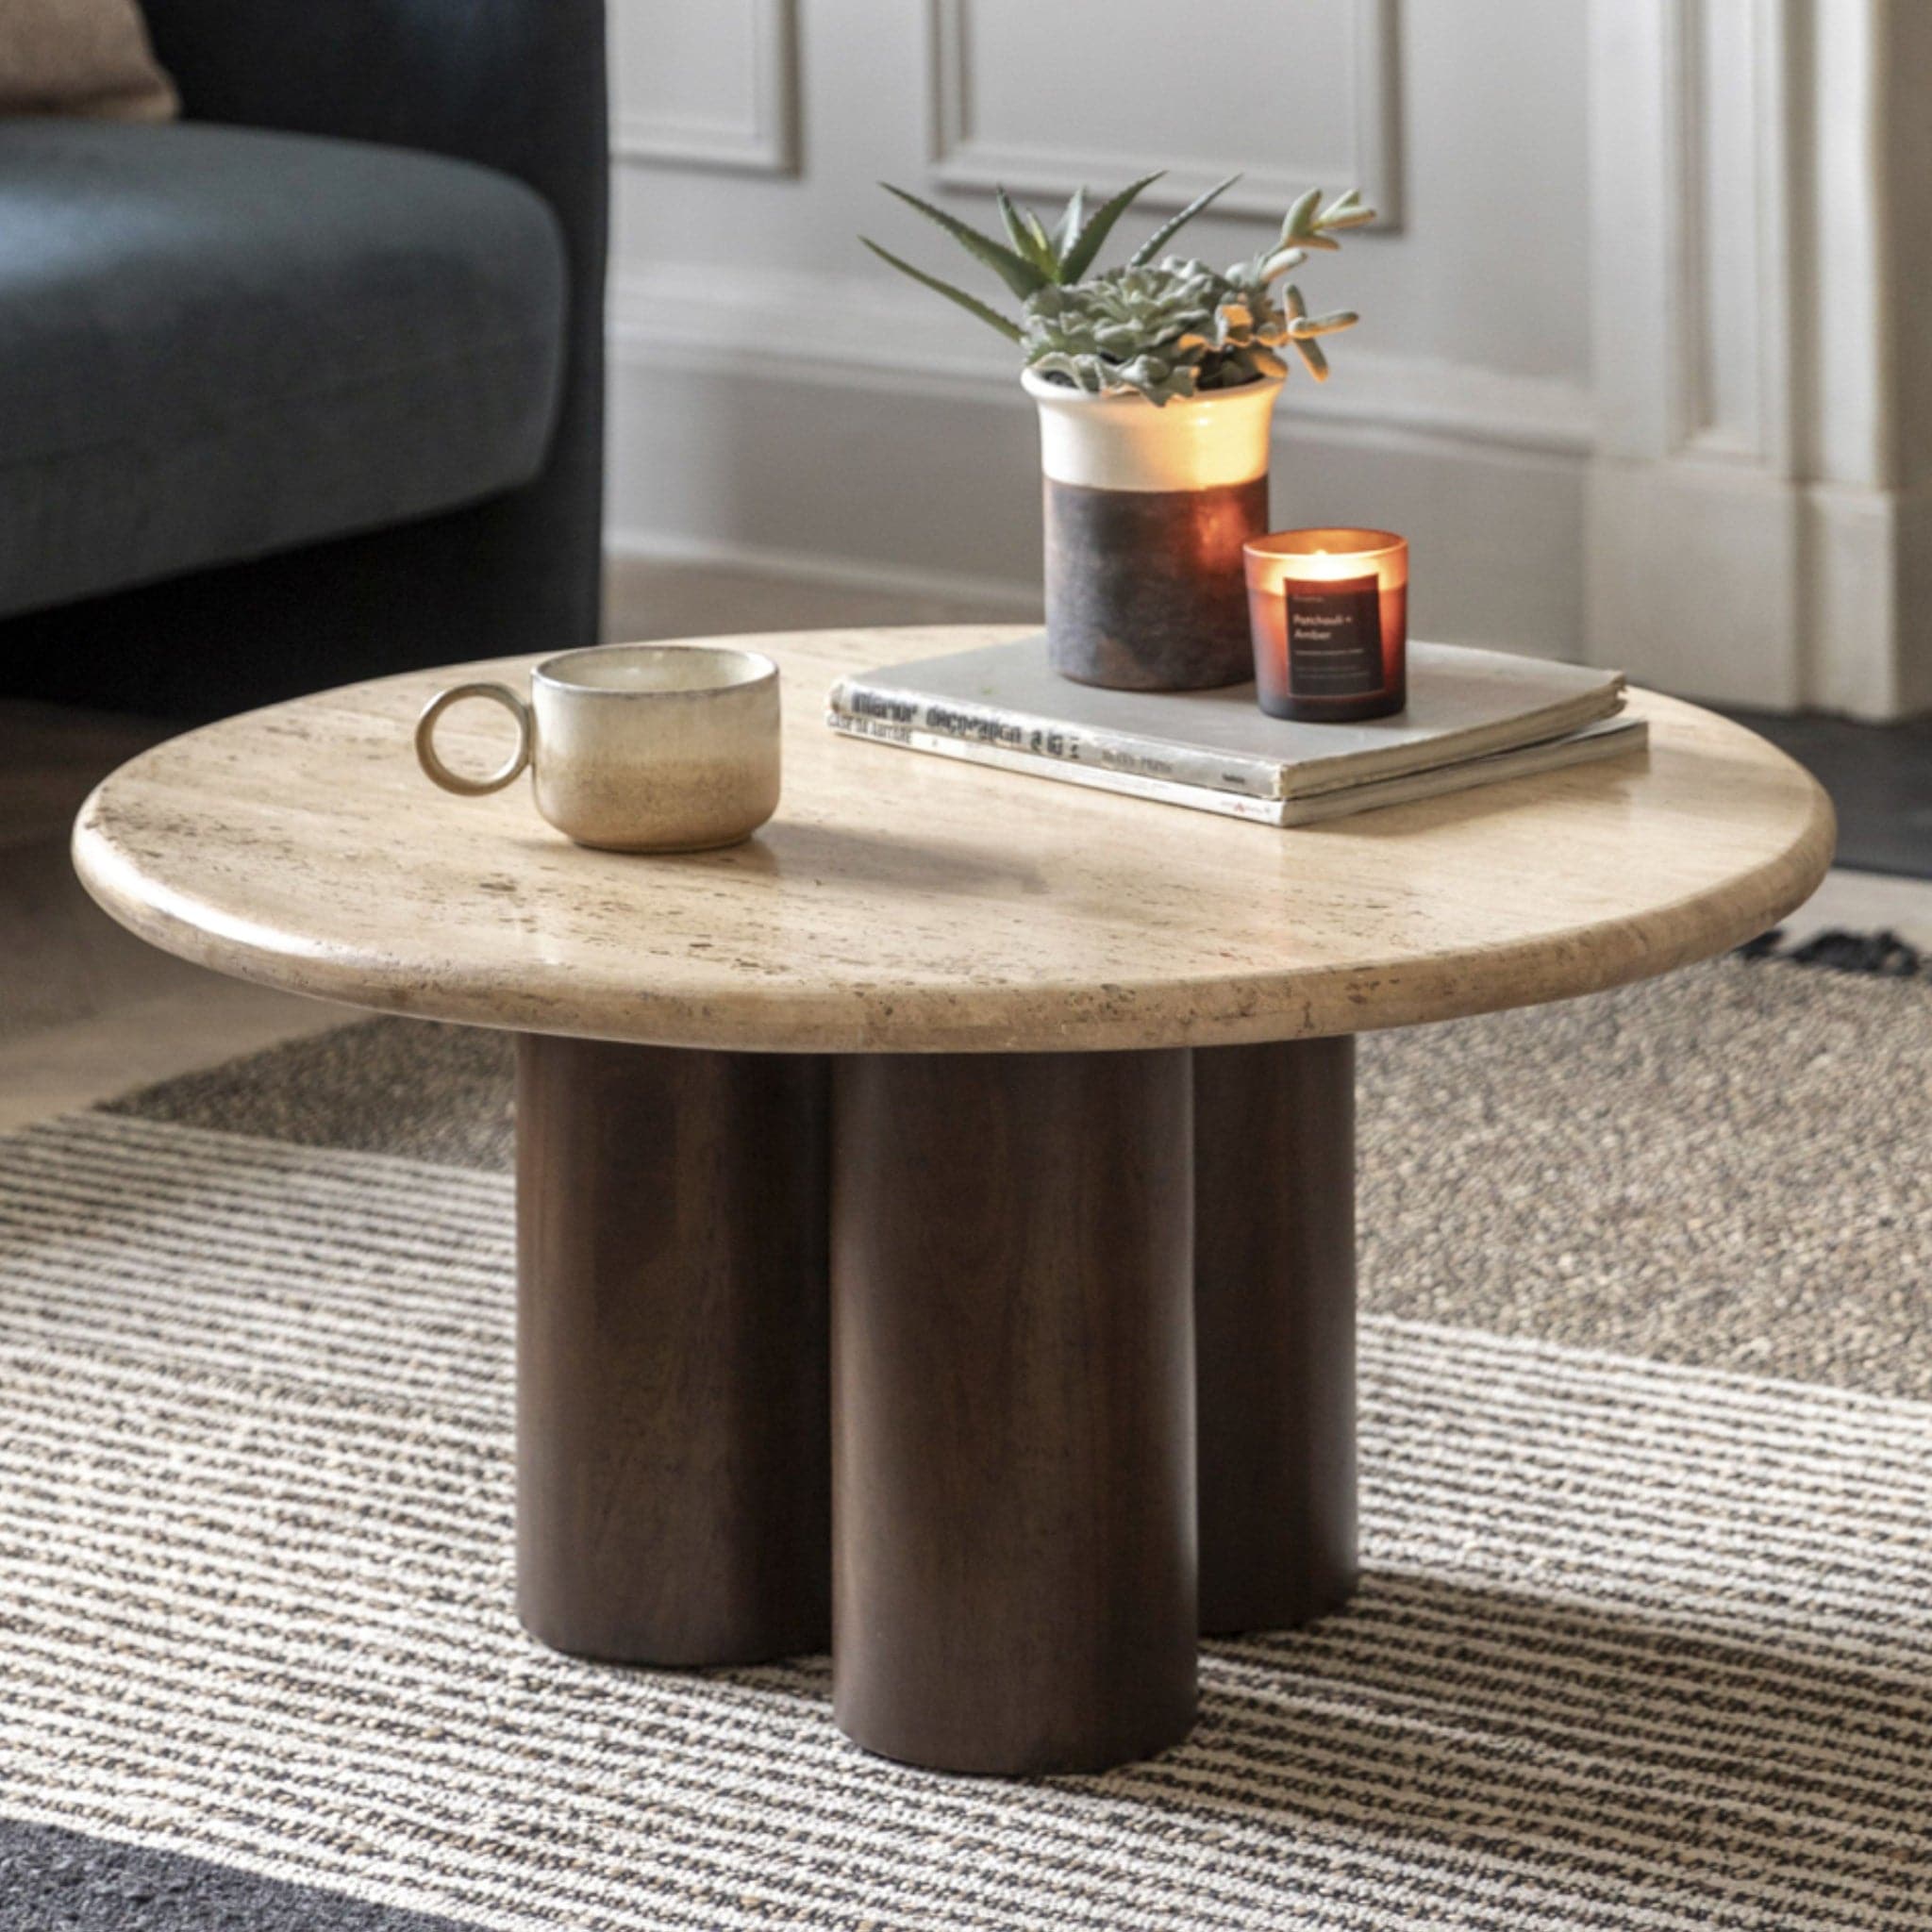 Mid Century Modern Inspired Coffee Table with Travertine Top - The Farthing